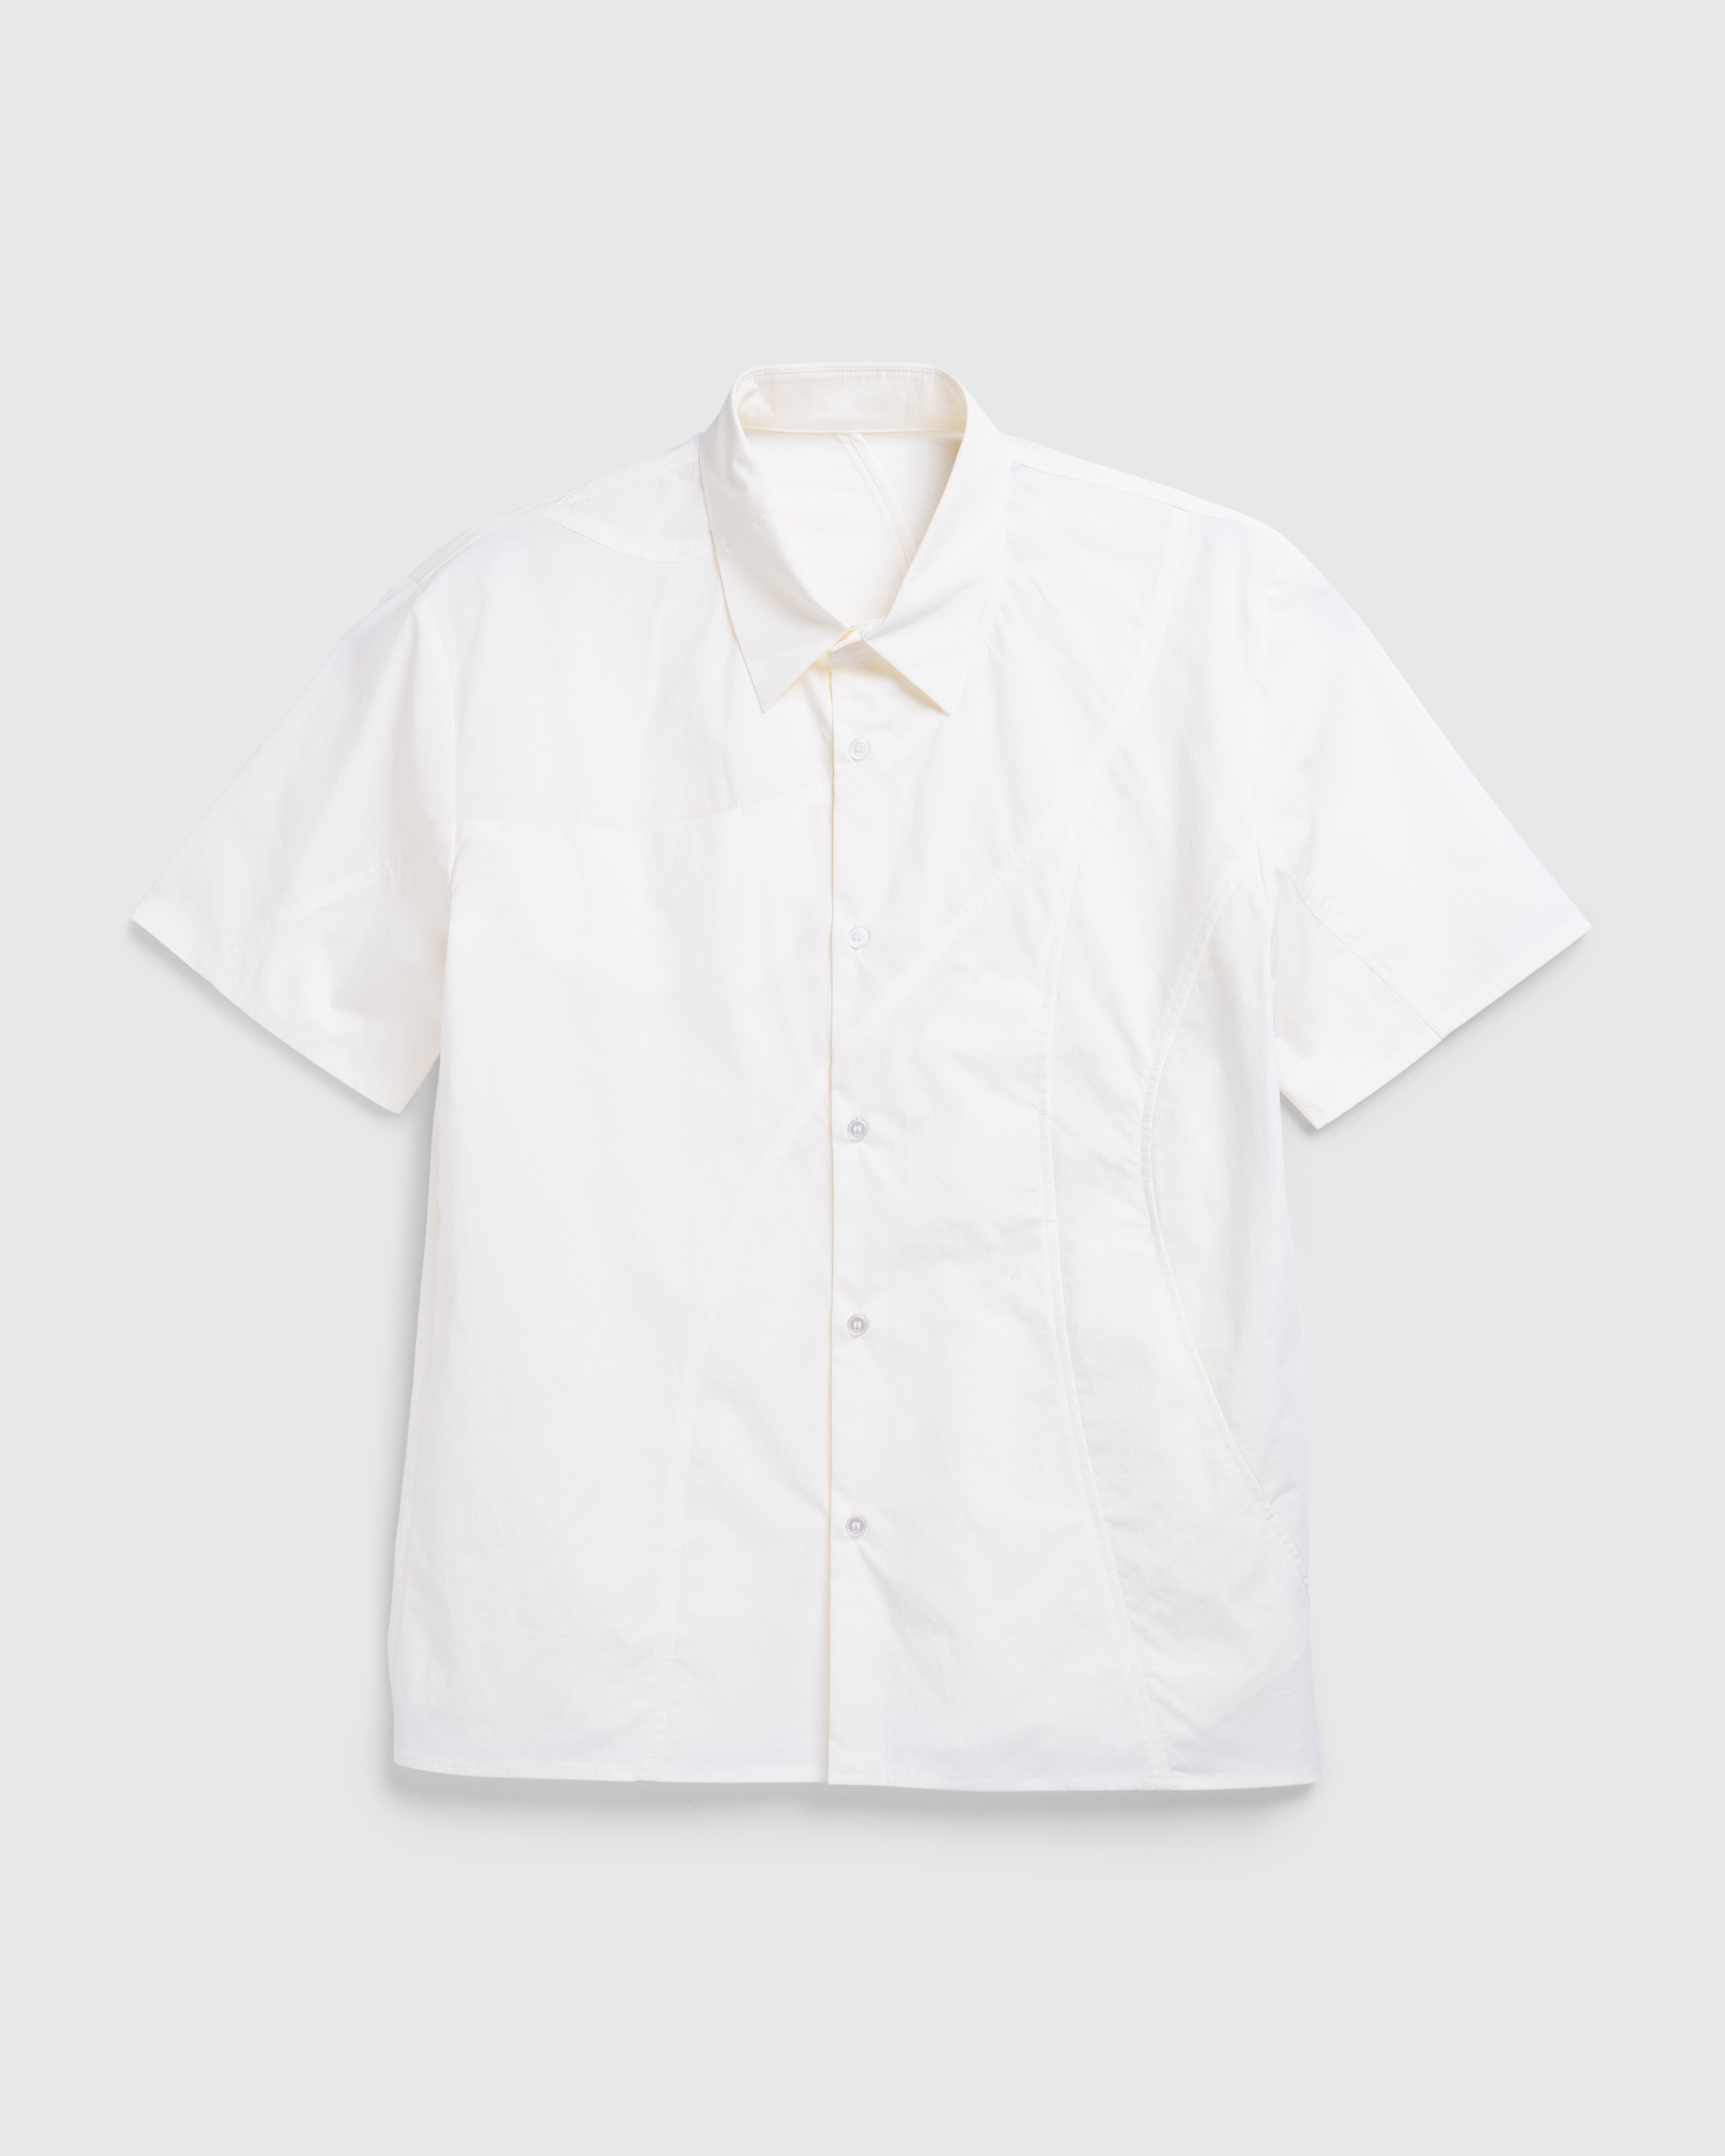 Post Archive Faction (PAF) – 6.0 Shirt Center White - Longsleeve Shirts - White - Image 1